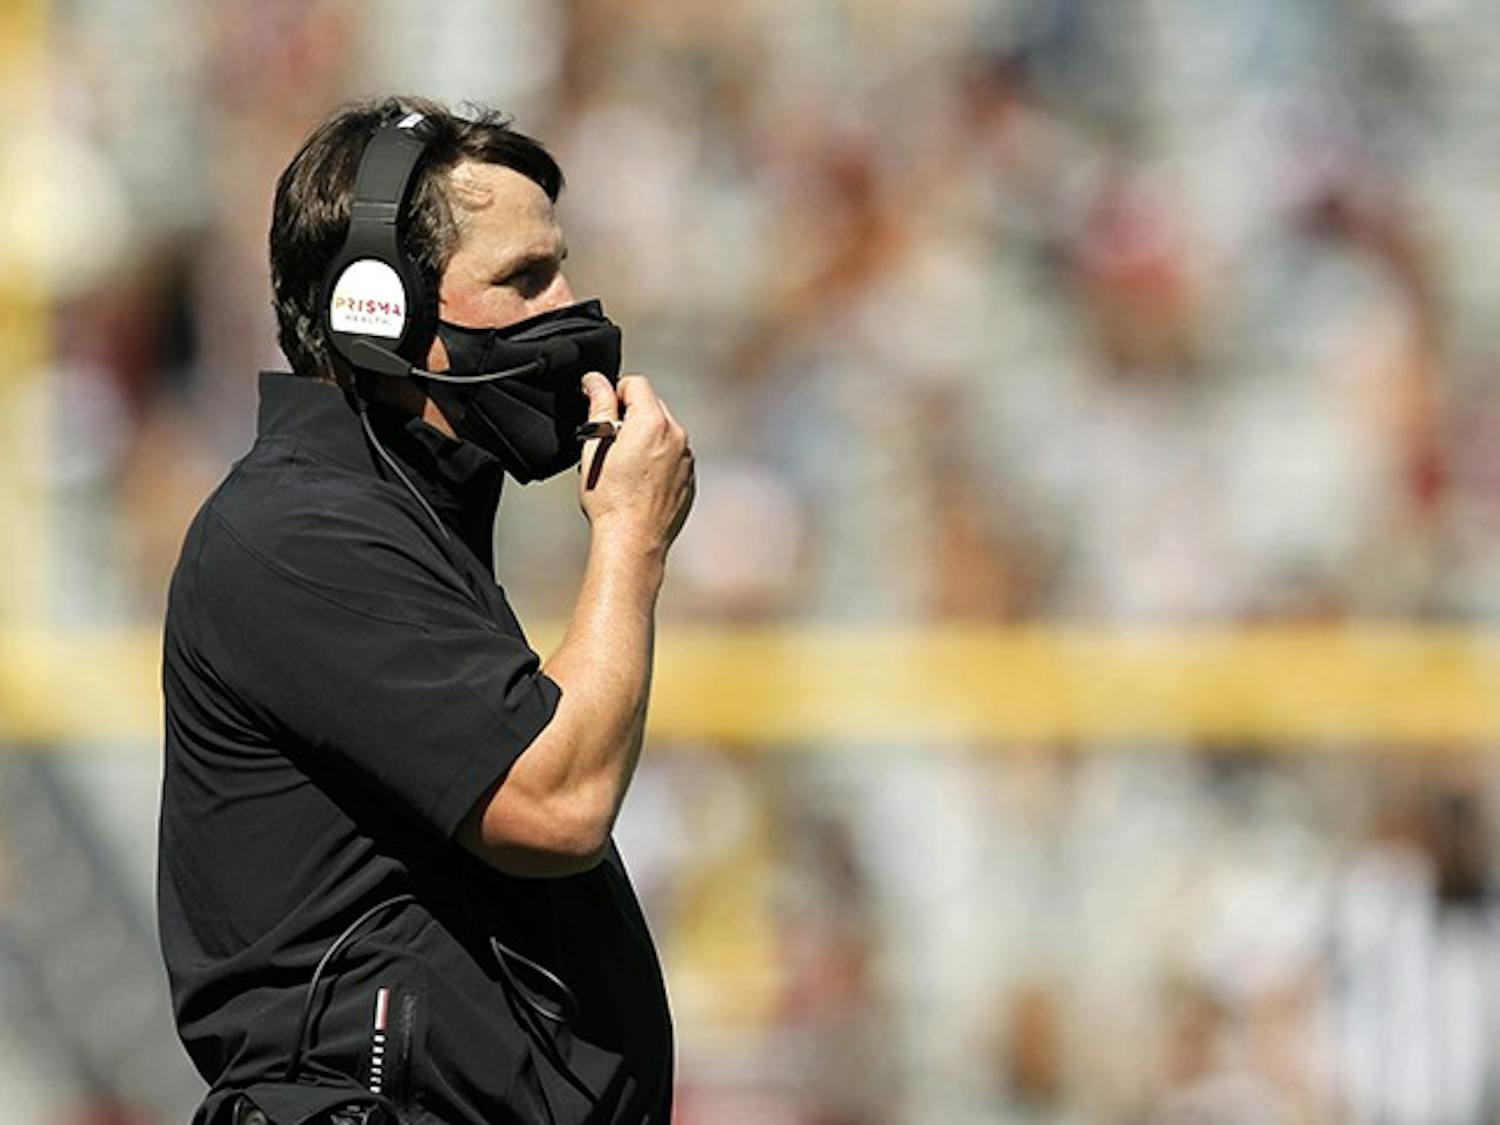 South Carolina head football coach Will Muschamp fixes his mask during the game against Auburn on Saturday, Oct. 17. The Gamecocks will travel to Baton Rouge on Saturday, Oct. 24 to take on the LSU Tigers.